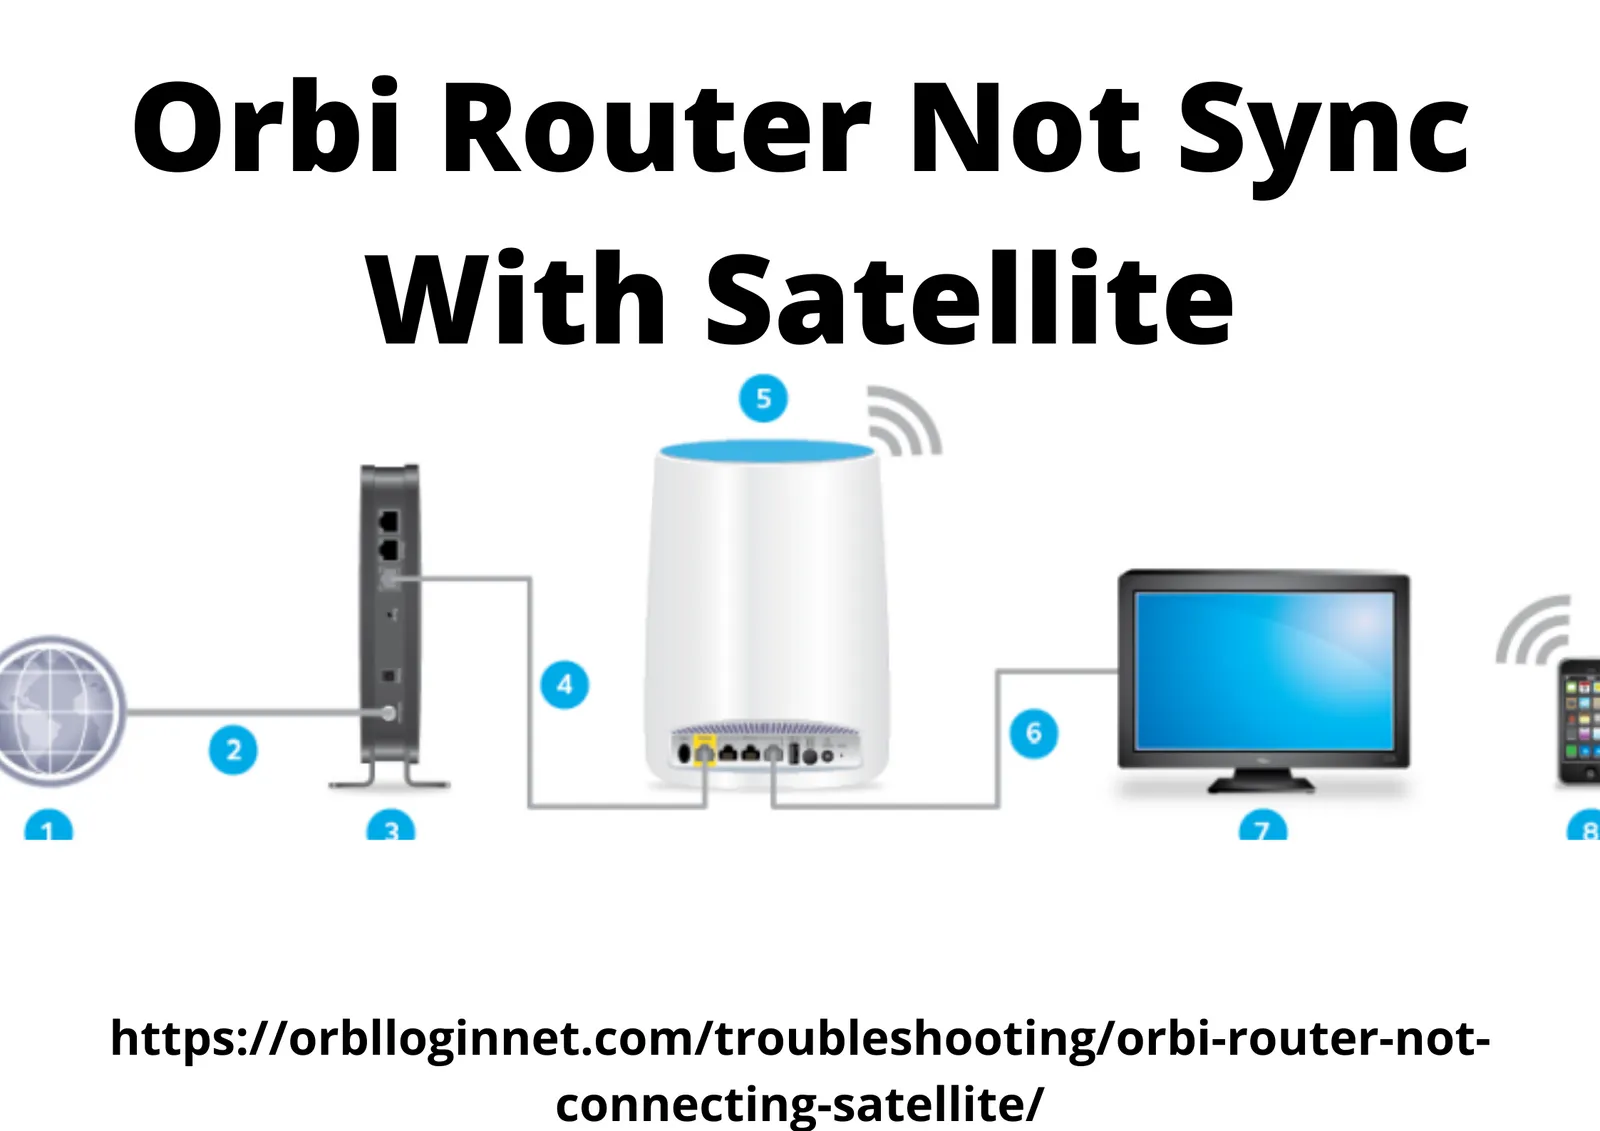 Fix Orbi Router Not Connecting To Satellite Issue